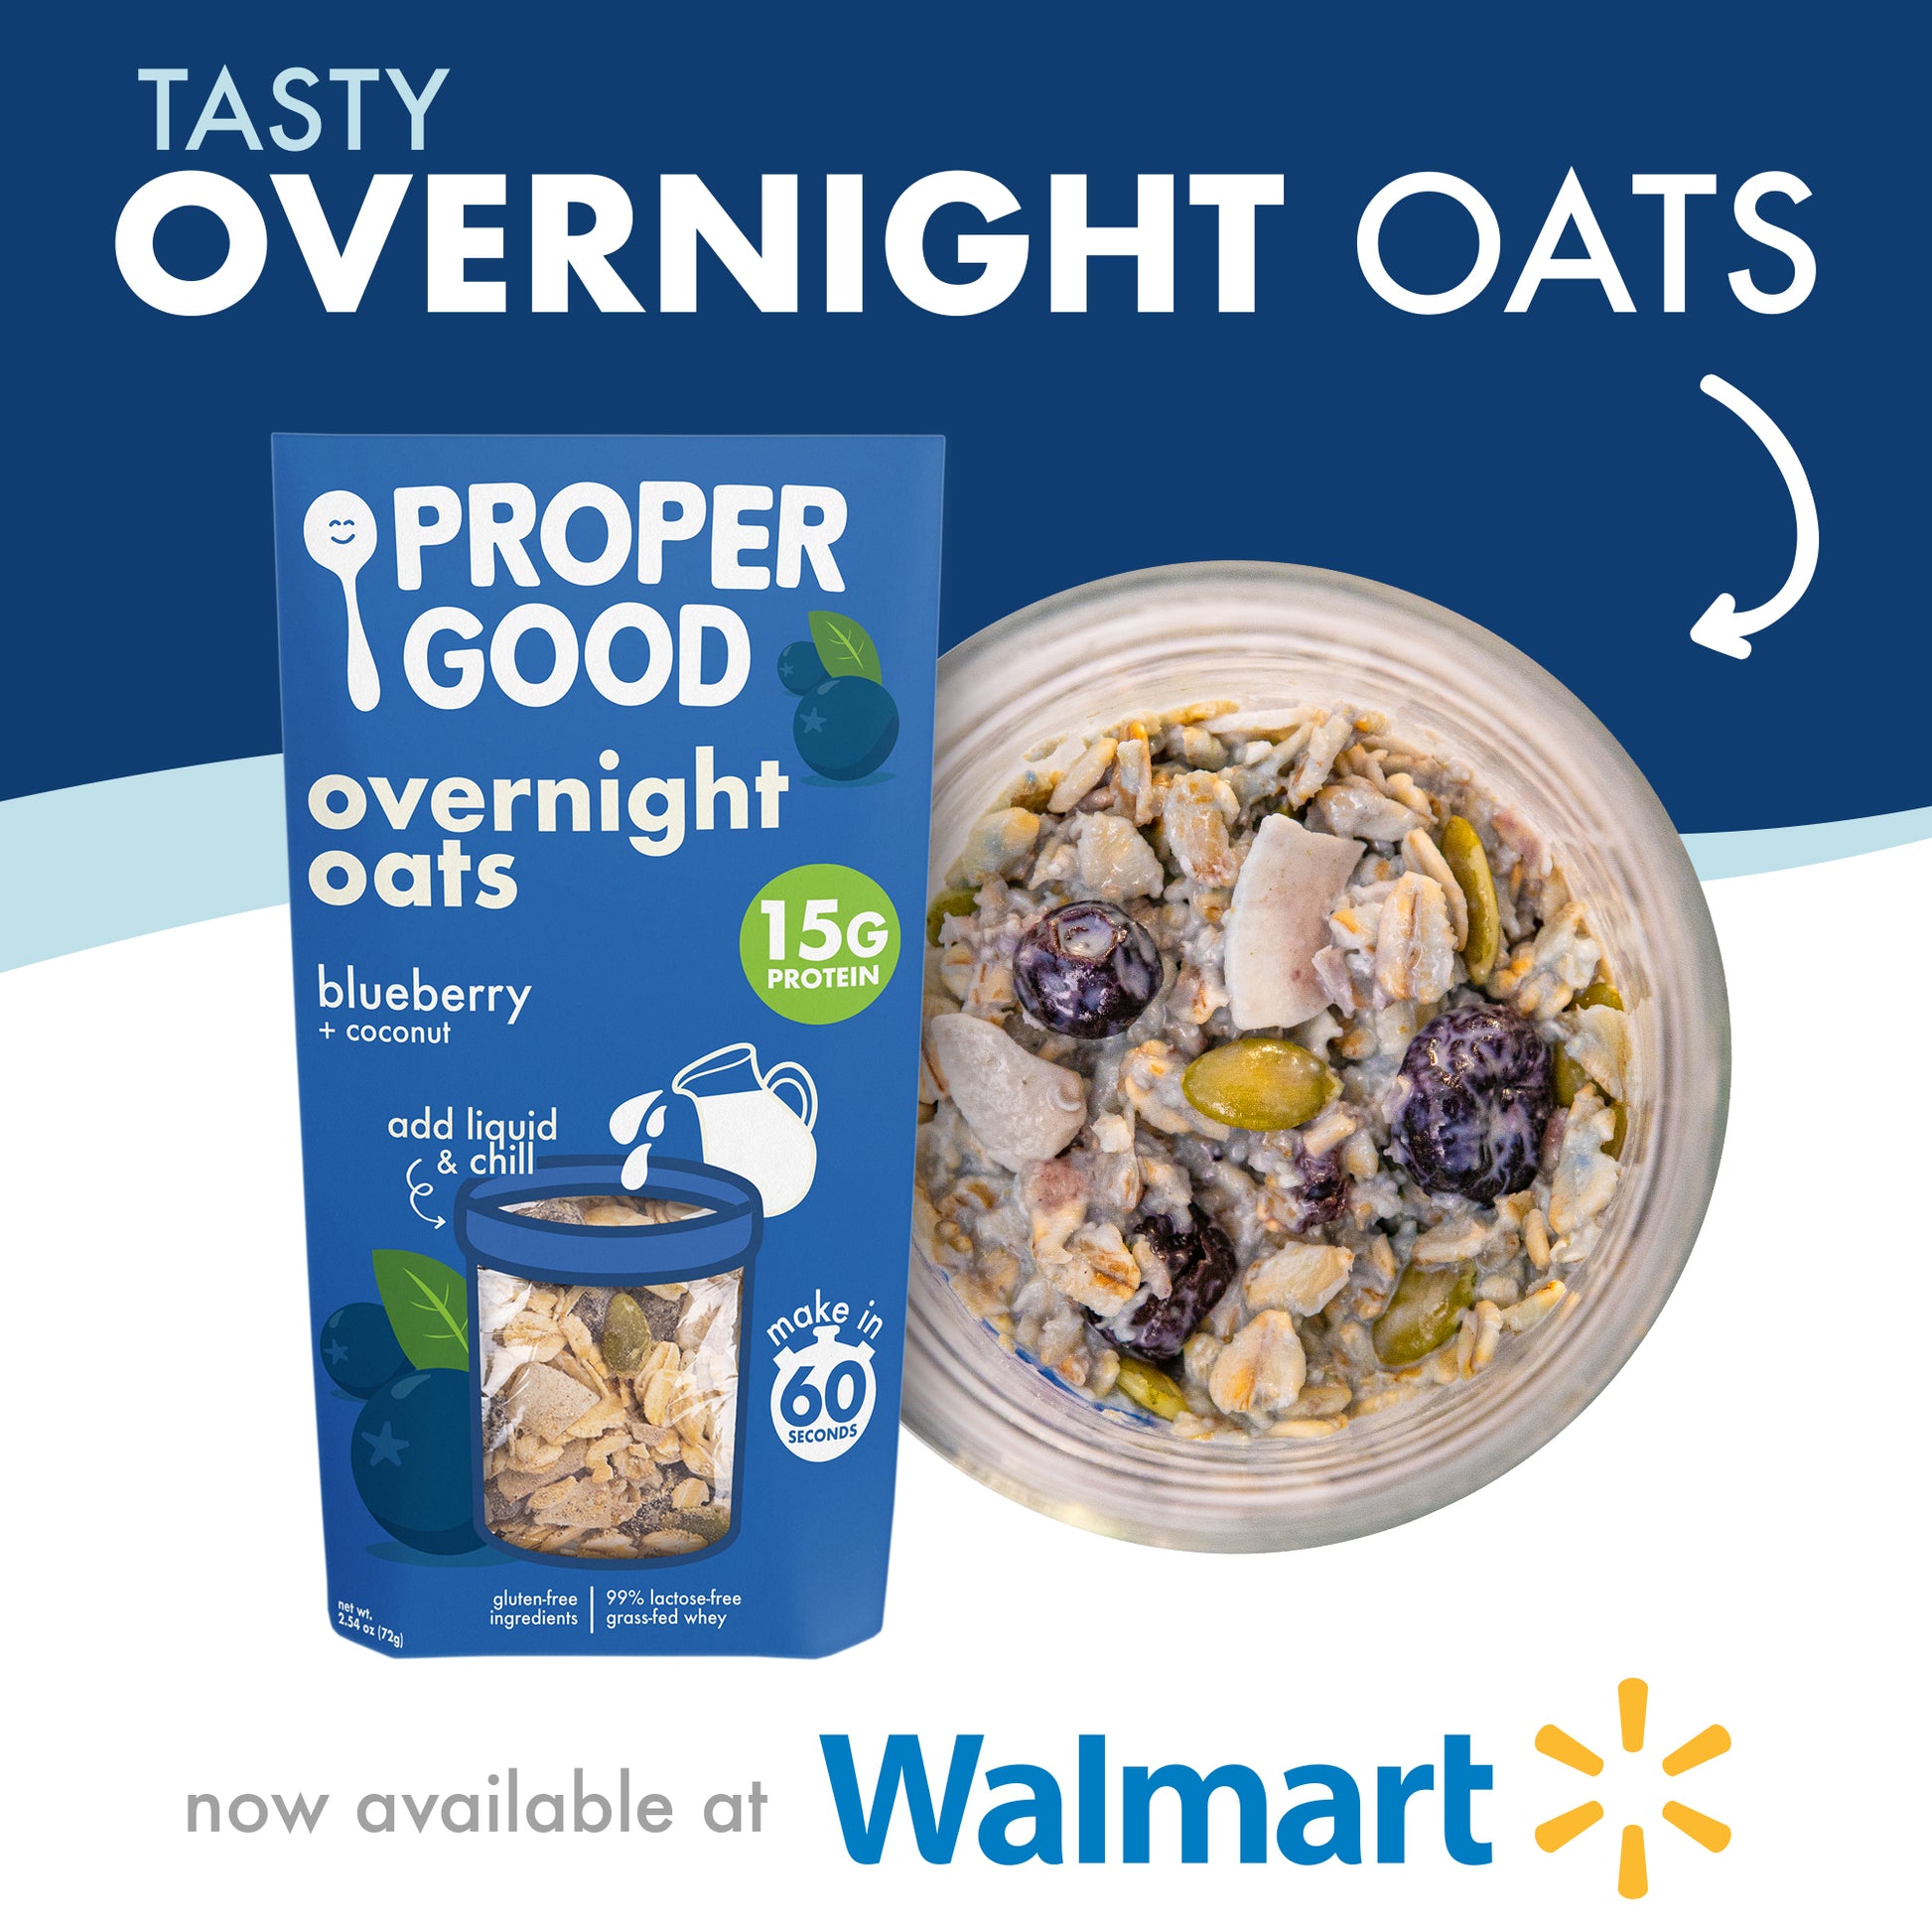 Blueberry Coconut Protein Overnight Oats available in Walmart - Proper Good